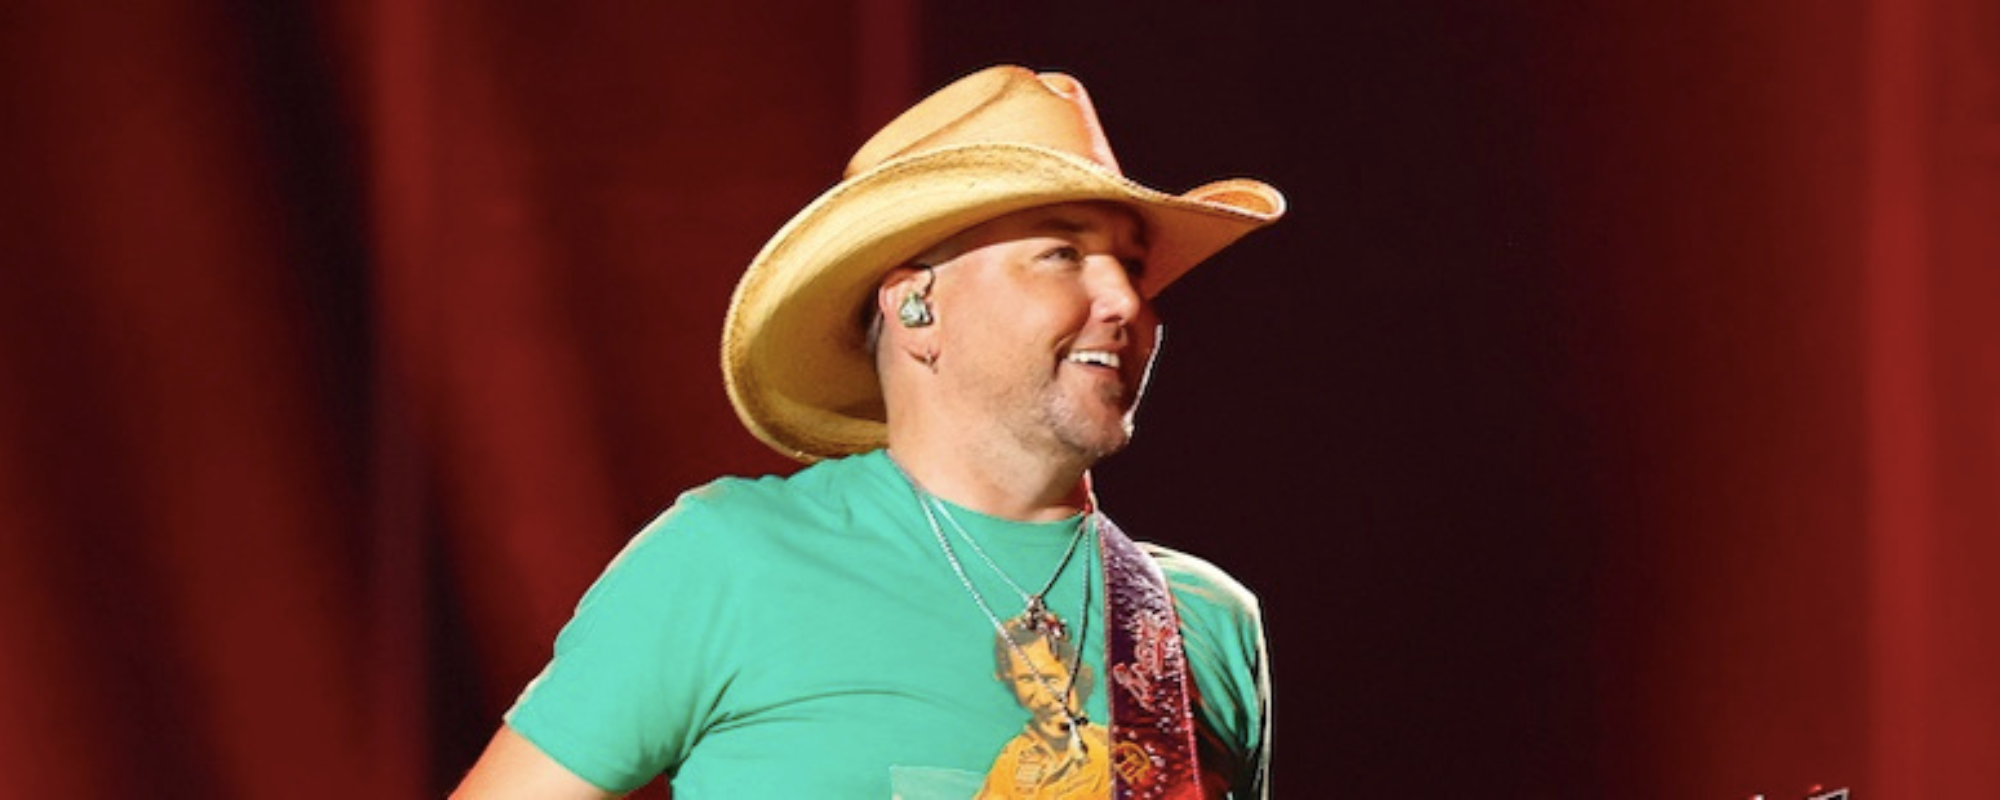 Jason Aldean Shares New Music Video for “Let Your Boys Be Country”